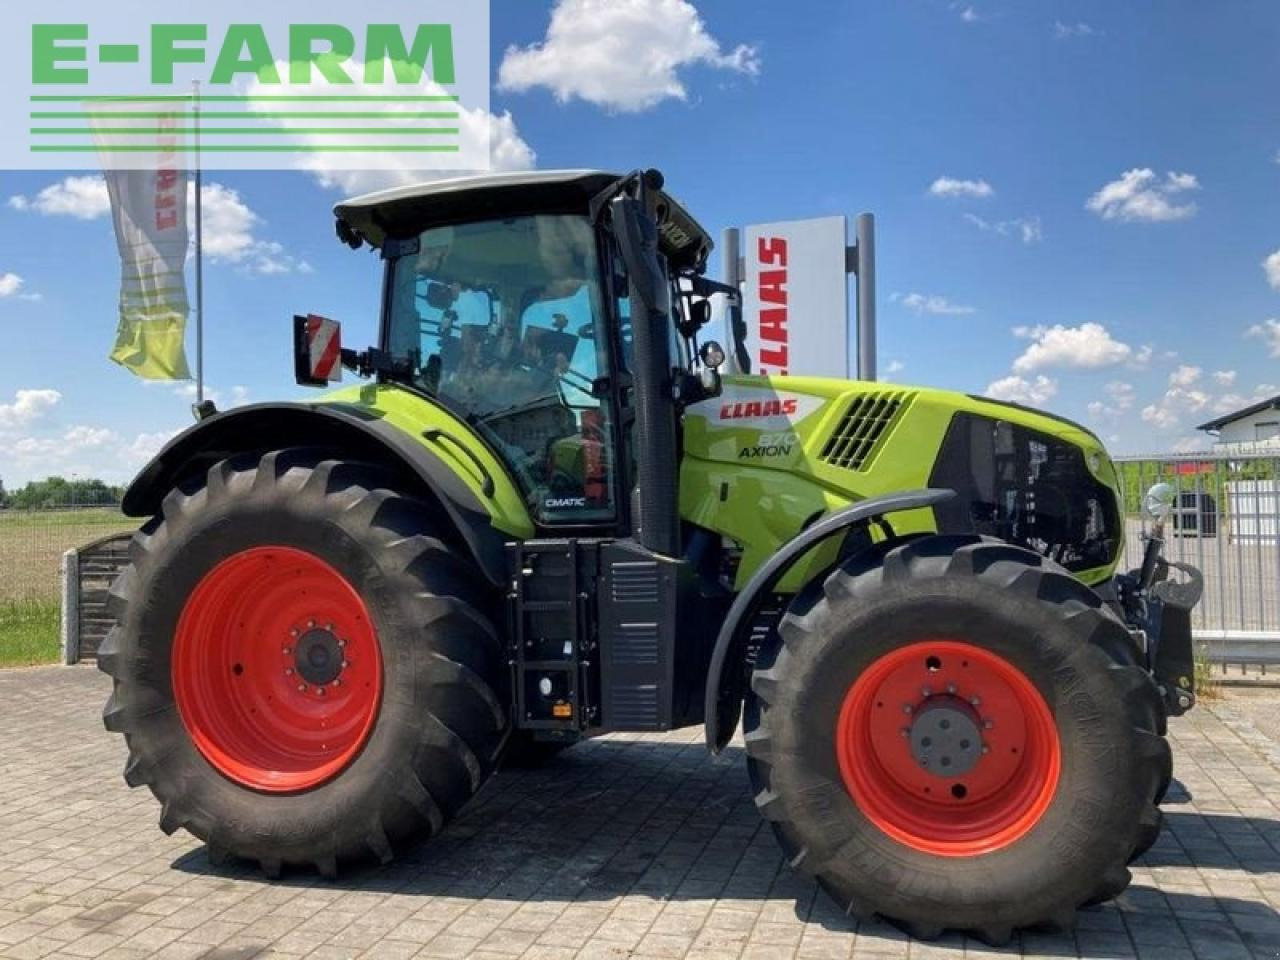 Tracteur agricole CLAAS axion 870 cmatic - stage v ce